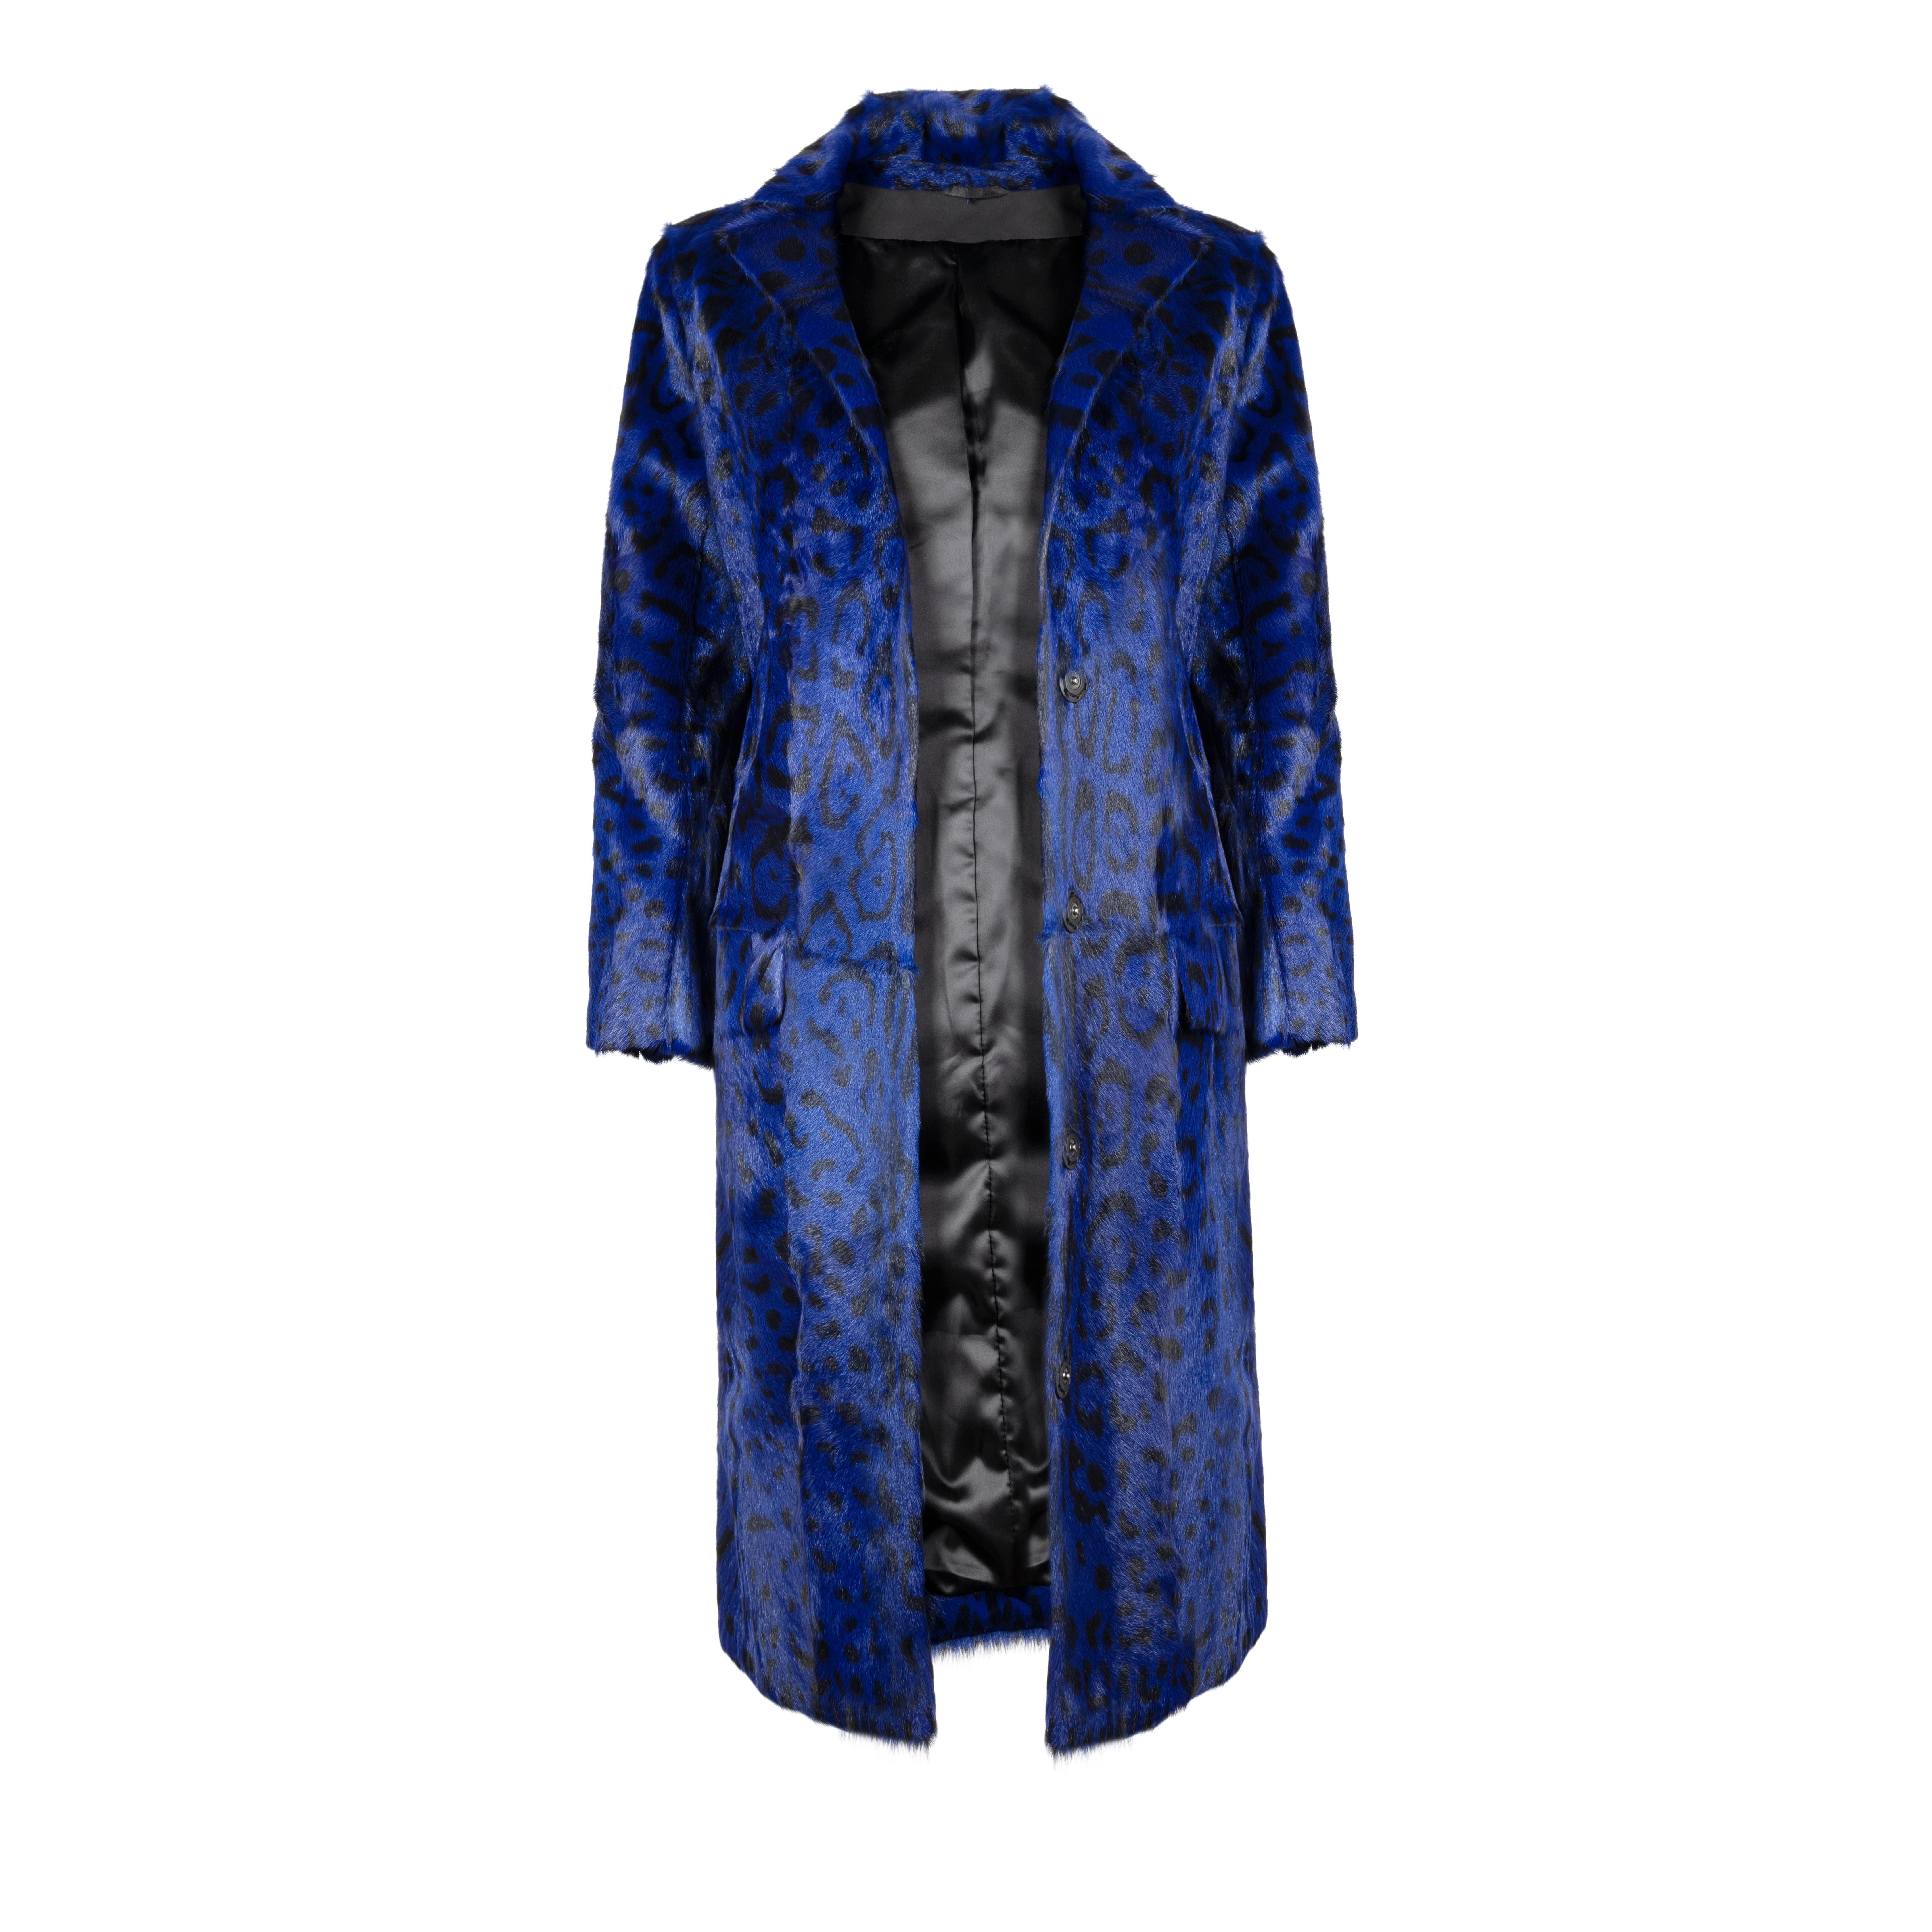 Verheyen London Leopard Print Coat in Ink Blue Goat Hair Fur - Size UK 8 

This Leopard print coat is Verheyen London’s classic staple for effortless style and glamour.
A coat for dressing up and down with jeans or a dress.

In 2017 Antonia Foyle